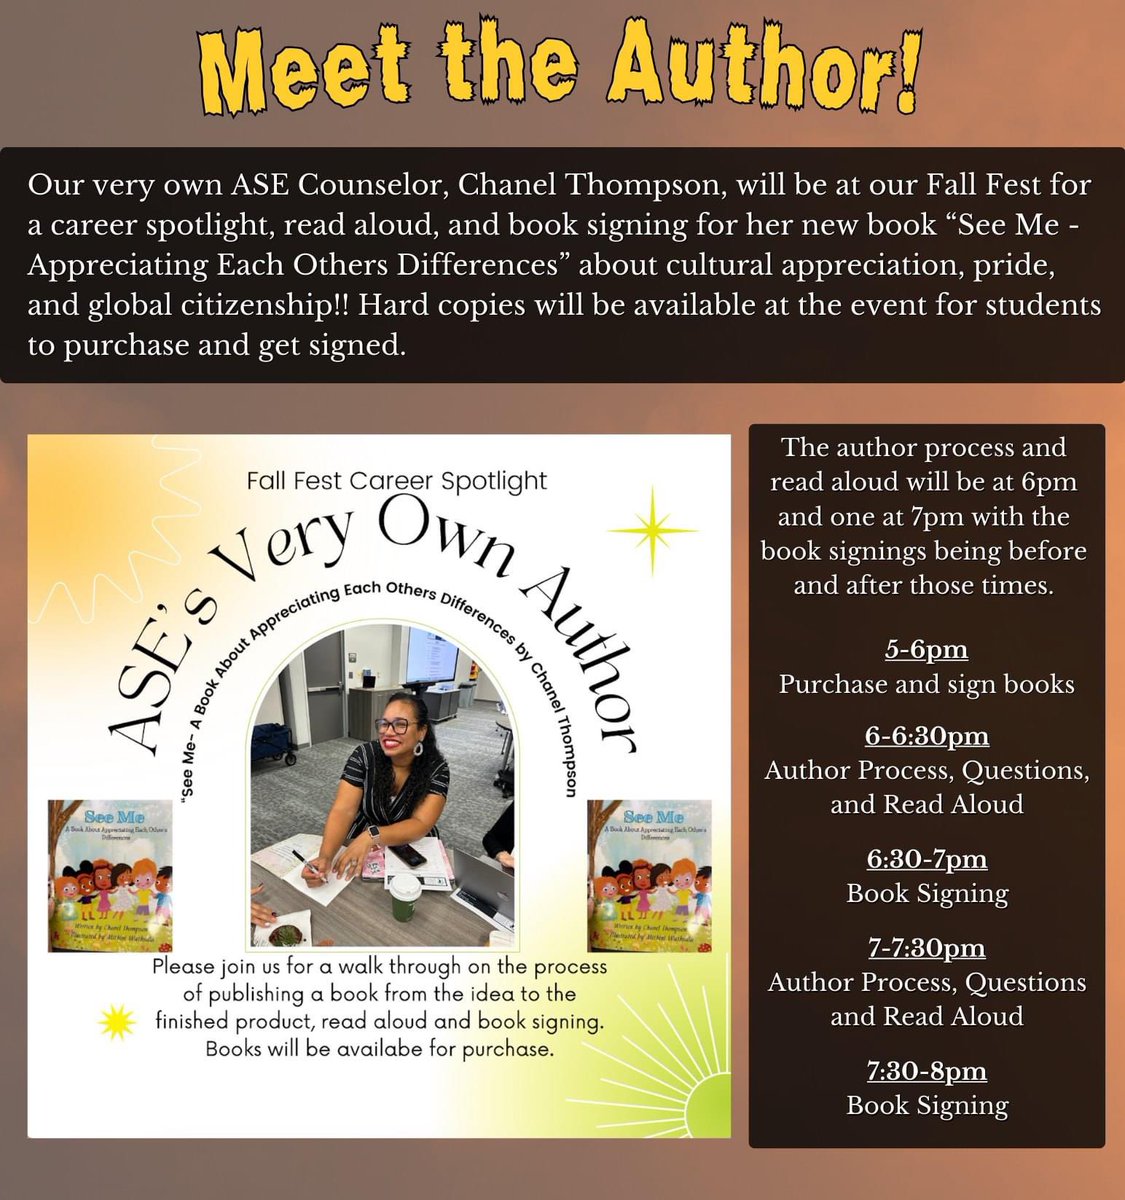 Did you know ASE has it's very own published author? @CThompson_ASE, will be talking about her new book 'See Me - Appreciating Each Others Differences' taking questions and signing books at ASE’s Fall Fest (October, Friday the 13th) so come see her inside on Main St!! #HumbleISD